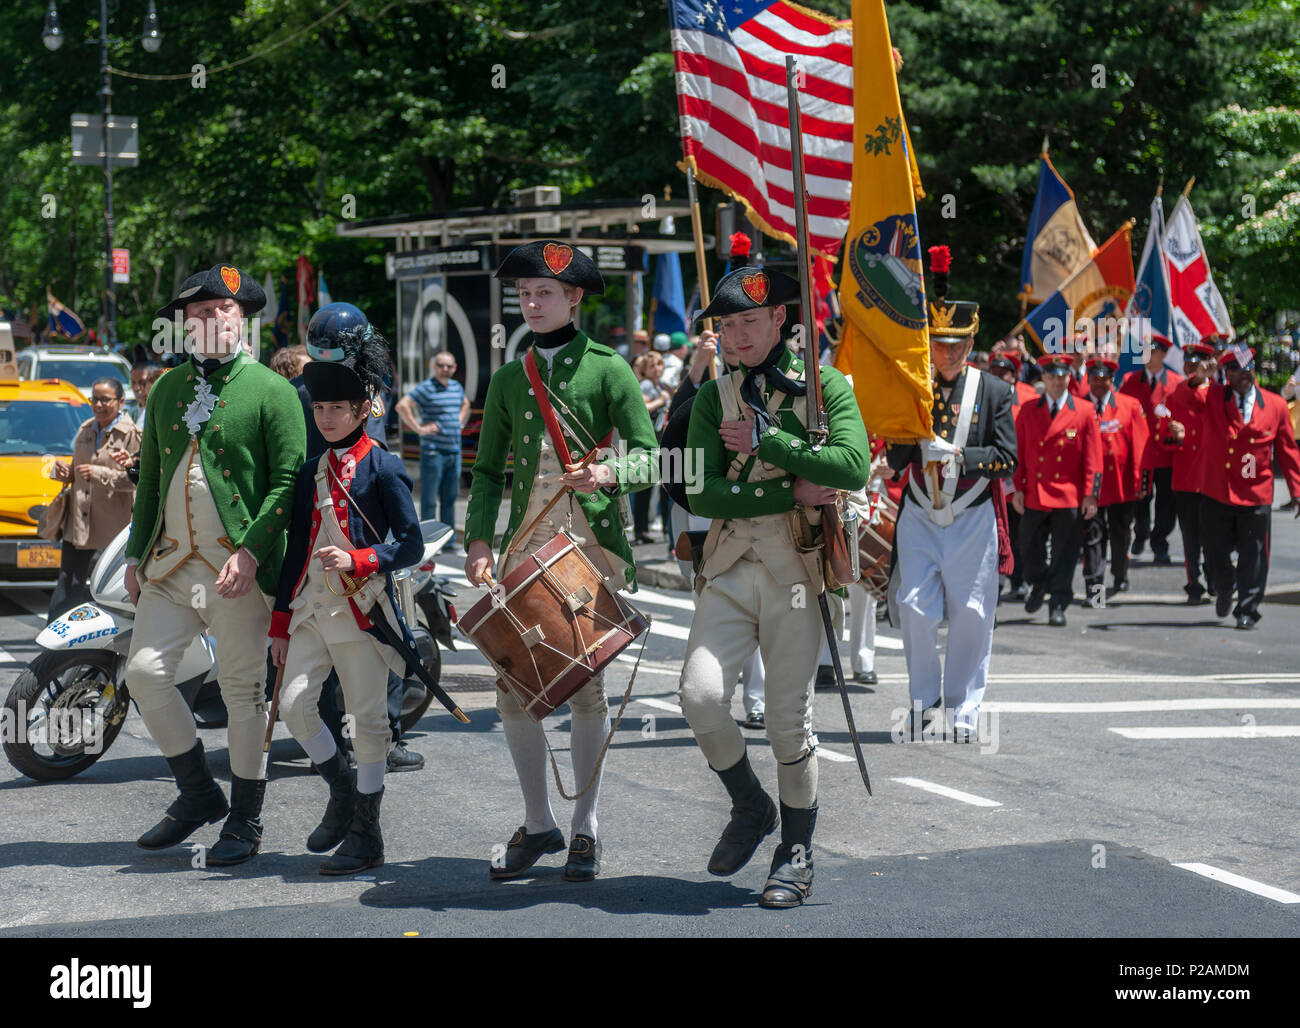 New York, USA. 14th Jun, 2018. Marchers in the annual Flag Day Parade in New York on Thursday, June 14, 2018, starting at New York City Hall Park.  Flag Day was created by proclamation by President Woodrow Wilson on June 14, 1916 as a holiday honoring America's flag but it was not until 1949 when it became National Flag Day.  The holiday honors the 1777 Flag Resolution where the stars and stripes were officially adopted as the flag of the United States. (© Richard B. Levine) Credit: Richard Levine/Alamy Live News Stock Photo